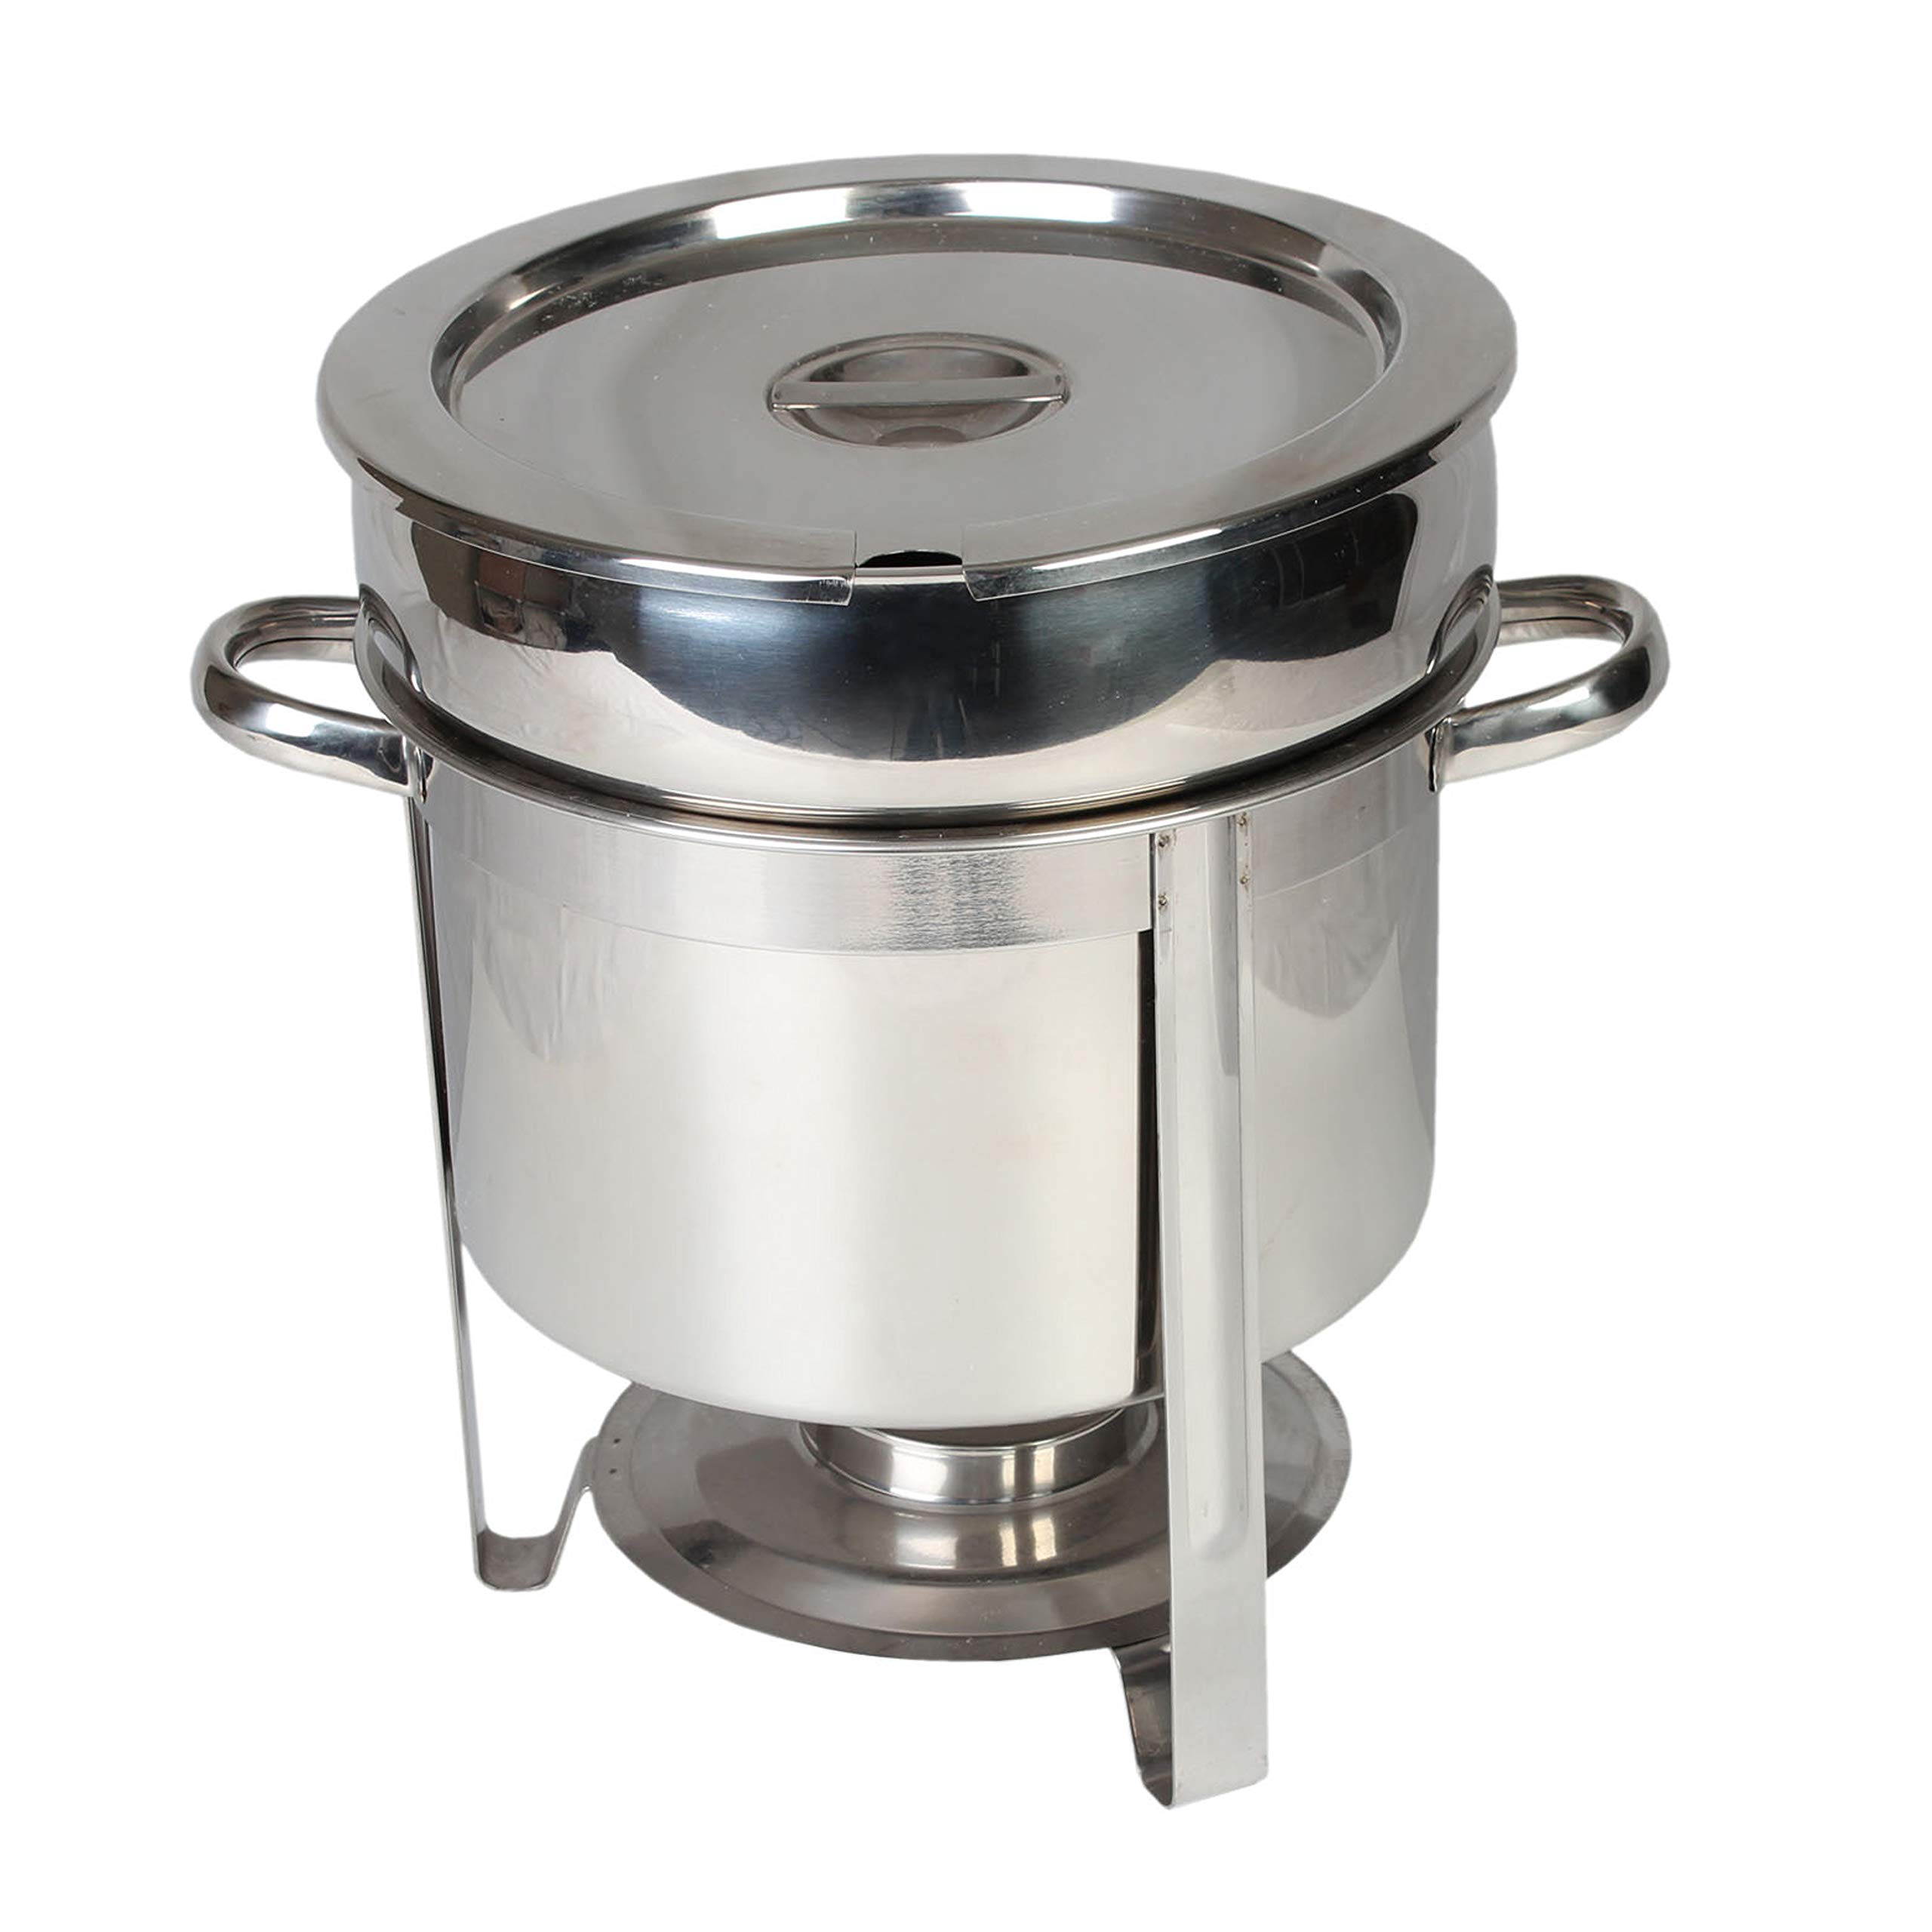 Thunder Group SLRCF8311 Marmite Chafer, 11 quart, 14-1/2" x 11-1/8" x 13-1/4"H, round, welded frame, lift-off lid, water pan, fuel holder, stainless steel, mirror-finish